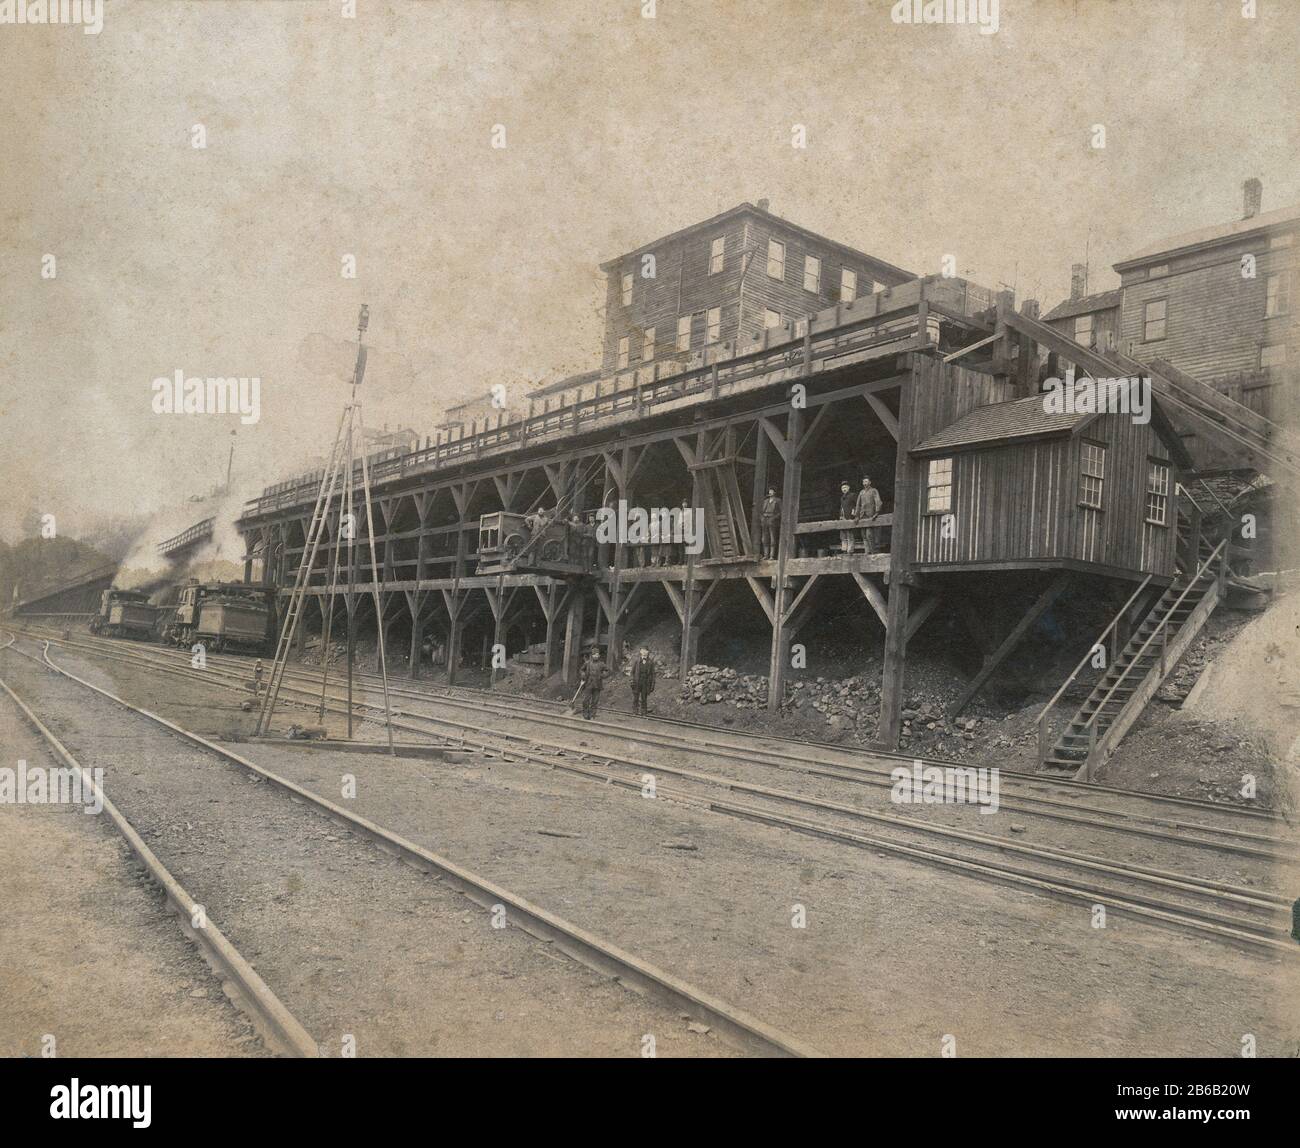 Antique 1891 photograph, coal refilling platform on the NYLE&W railroad line. Exact location unknown. SOURCE: ORIGINAL PHOTOGRAPH Stock Photo